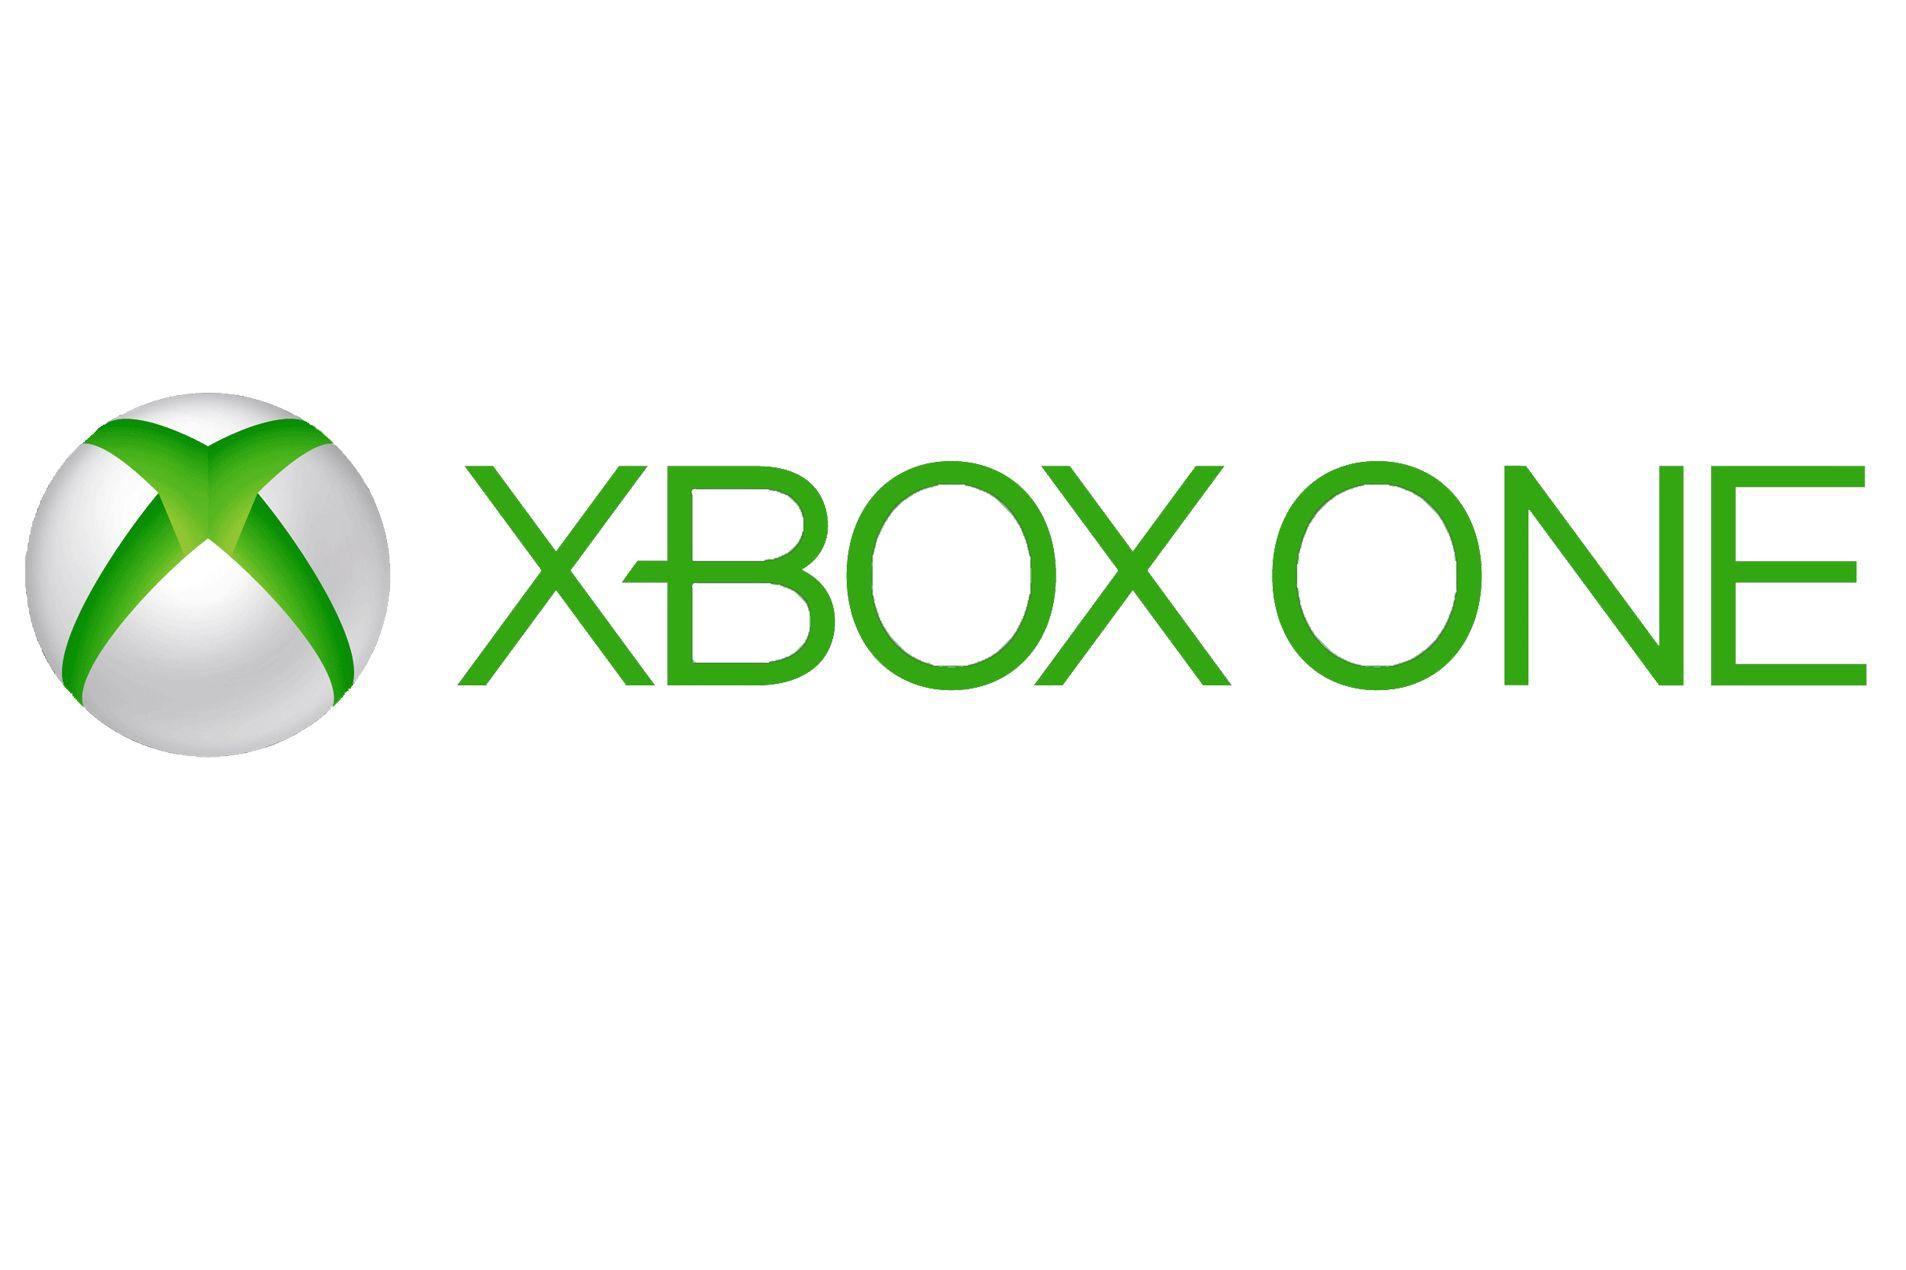 Pay Box Logo - Xbox One users will have to pay for Skype | Cloud Pro